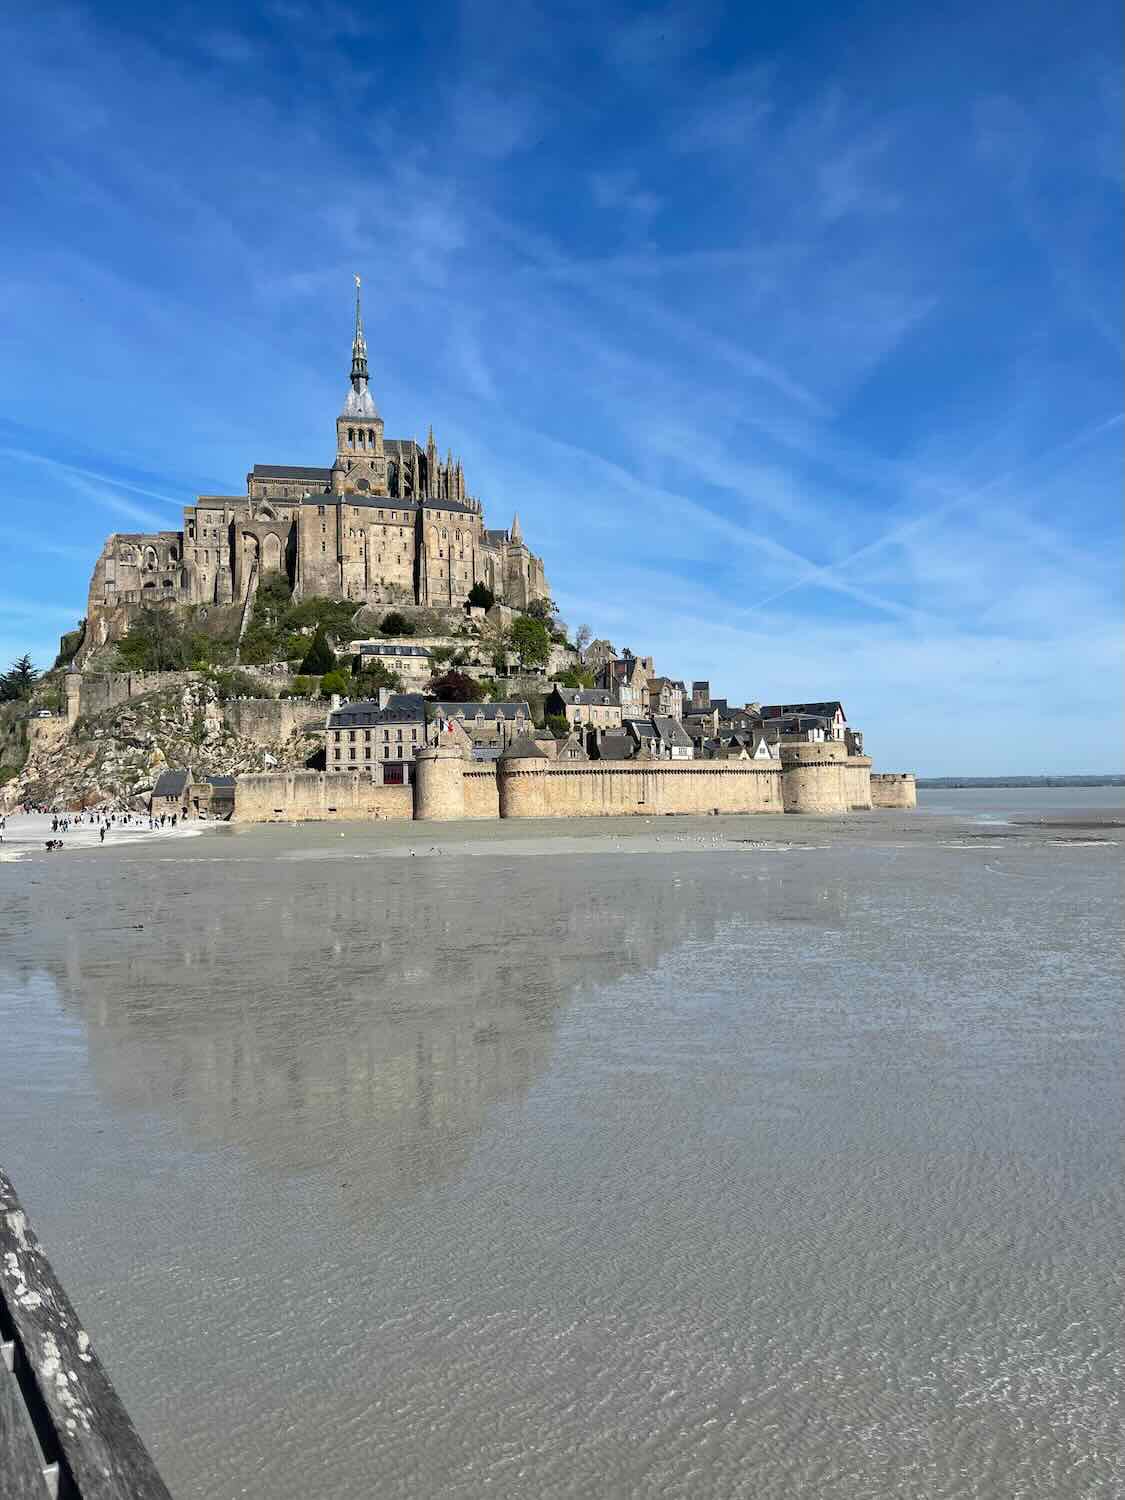 Clear day view of Mont Saint Michel, showing the entire island and abbey against a bright blue sky, reflecting on a shallow bay.